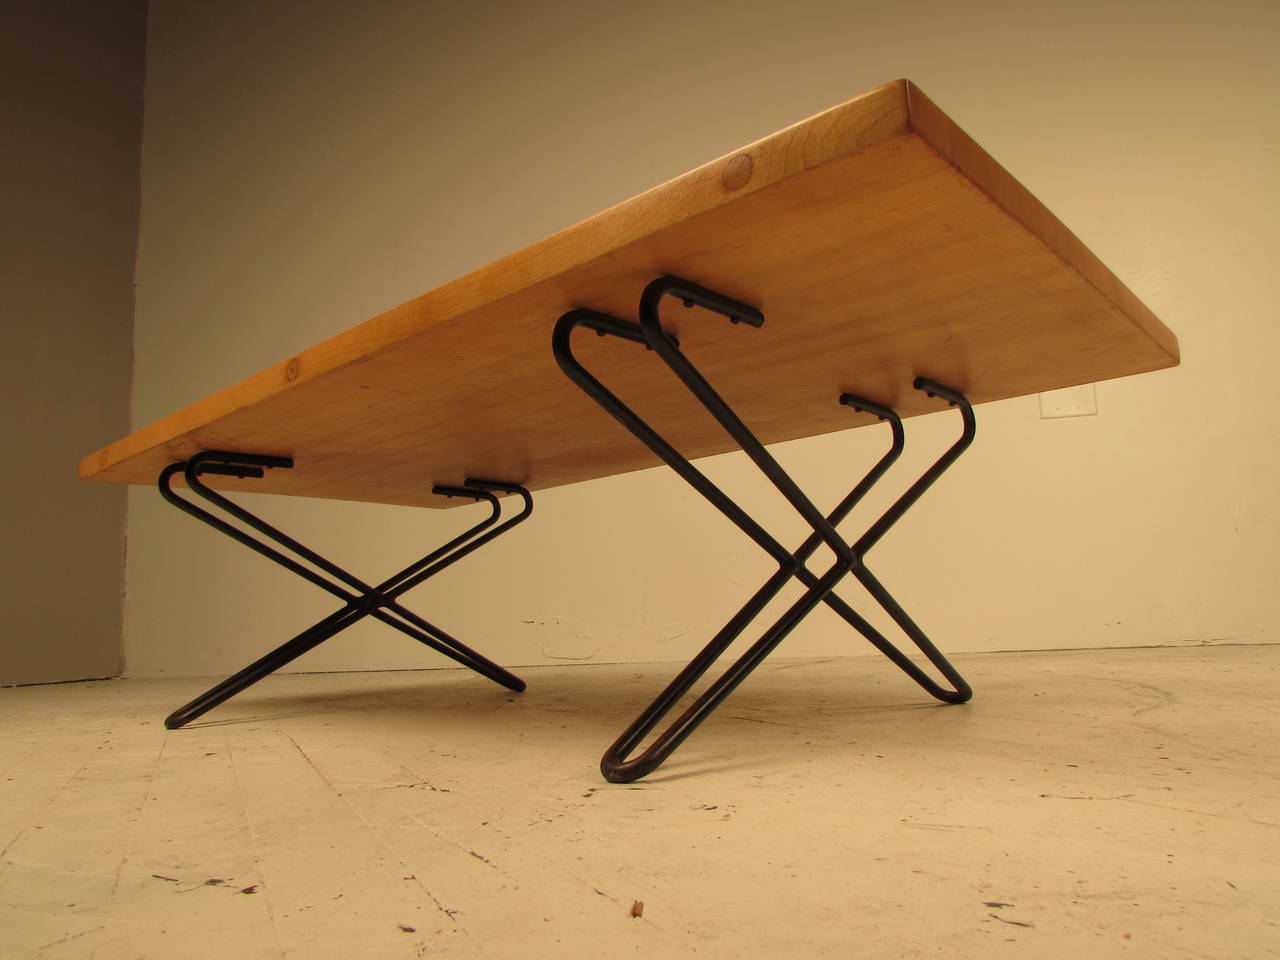 Unique custom coffee table designed by Henry Robert Kann, a NY designer and architect, circa 1953. The top is solid maple and the wrought iron legs are a highly sculptural variation on a hairpin leg, giving the piece a very 1950s French or